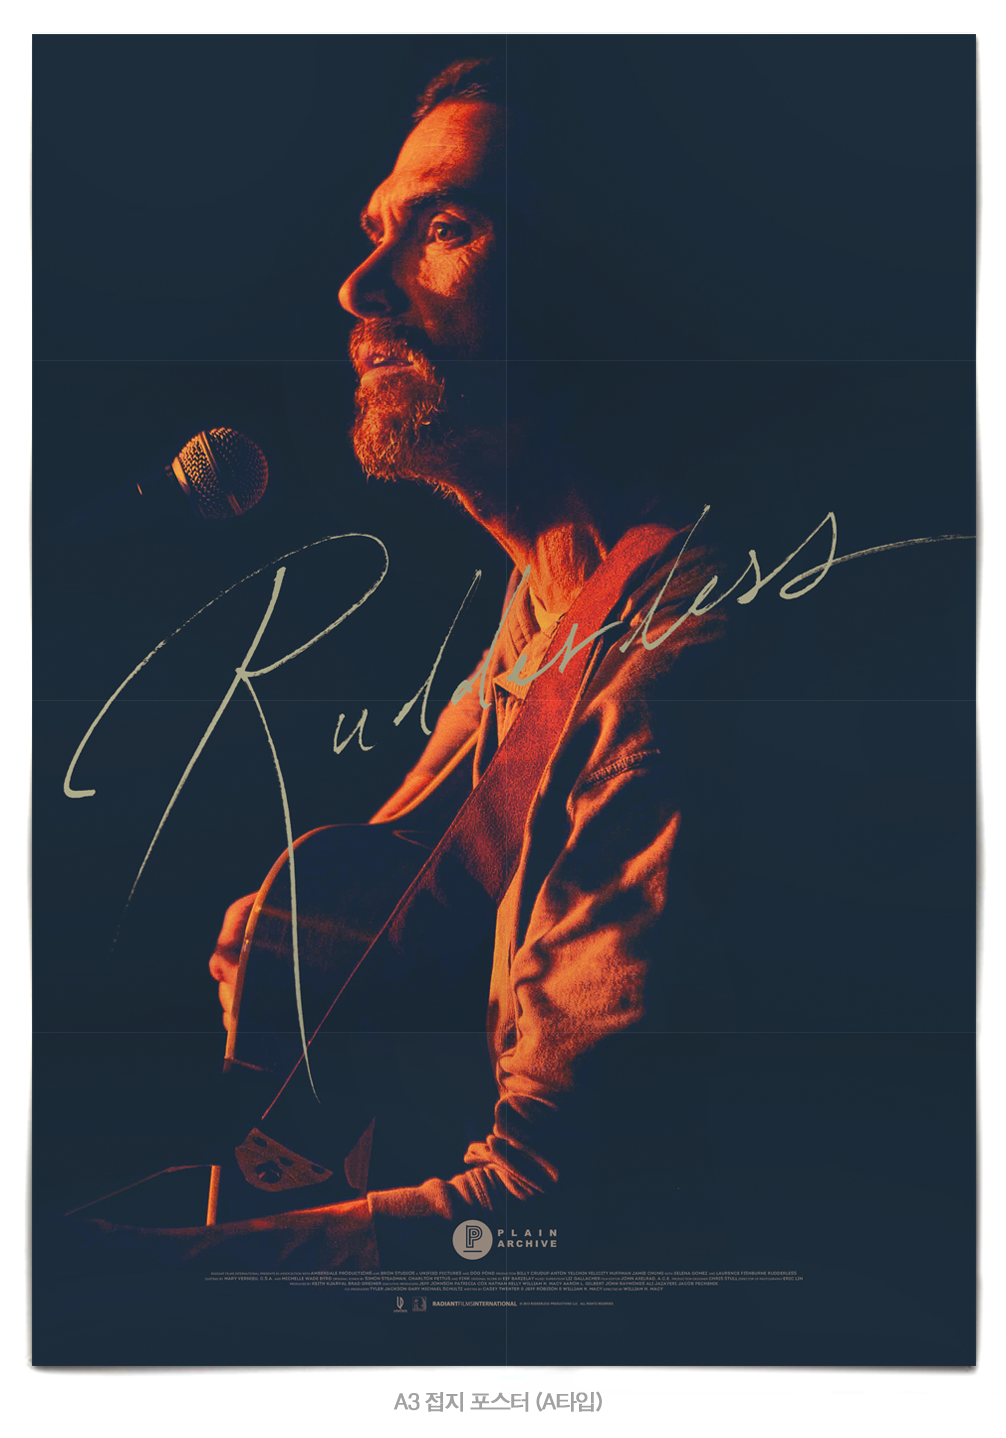 Rudderless (Design A): Exclusive & Limited Edition (PA034)